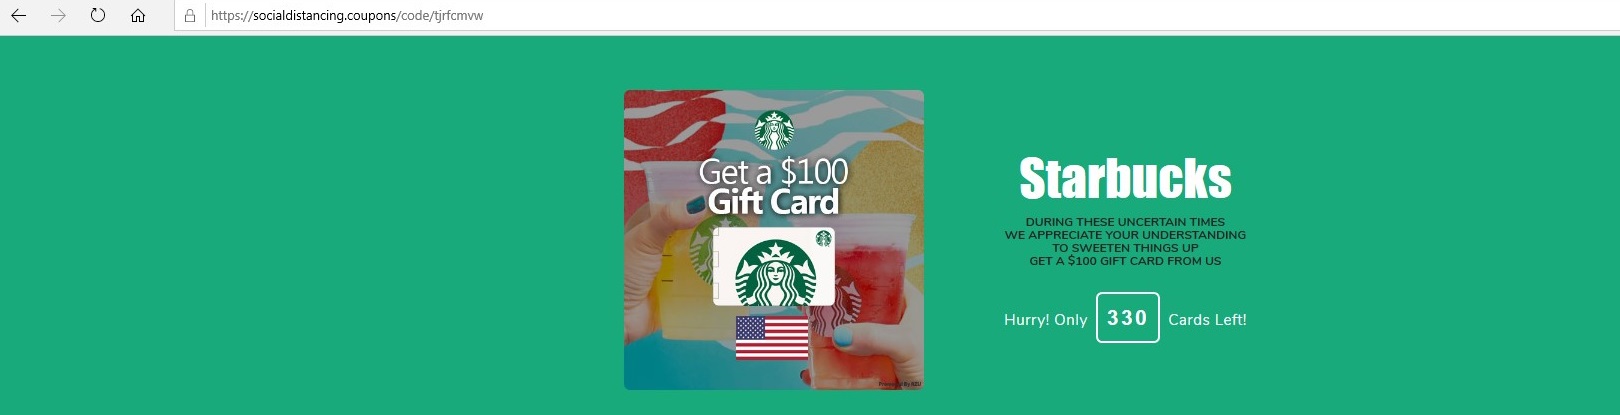 Starbucks Social Distancing Gift Card Scam